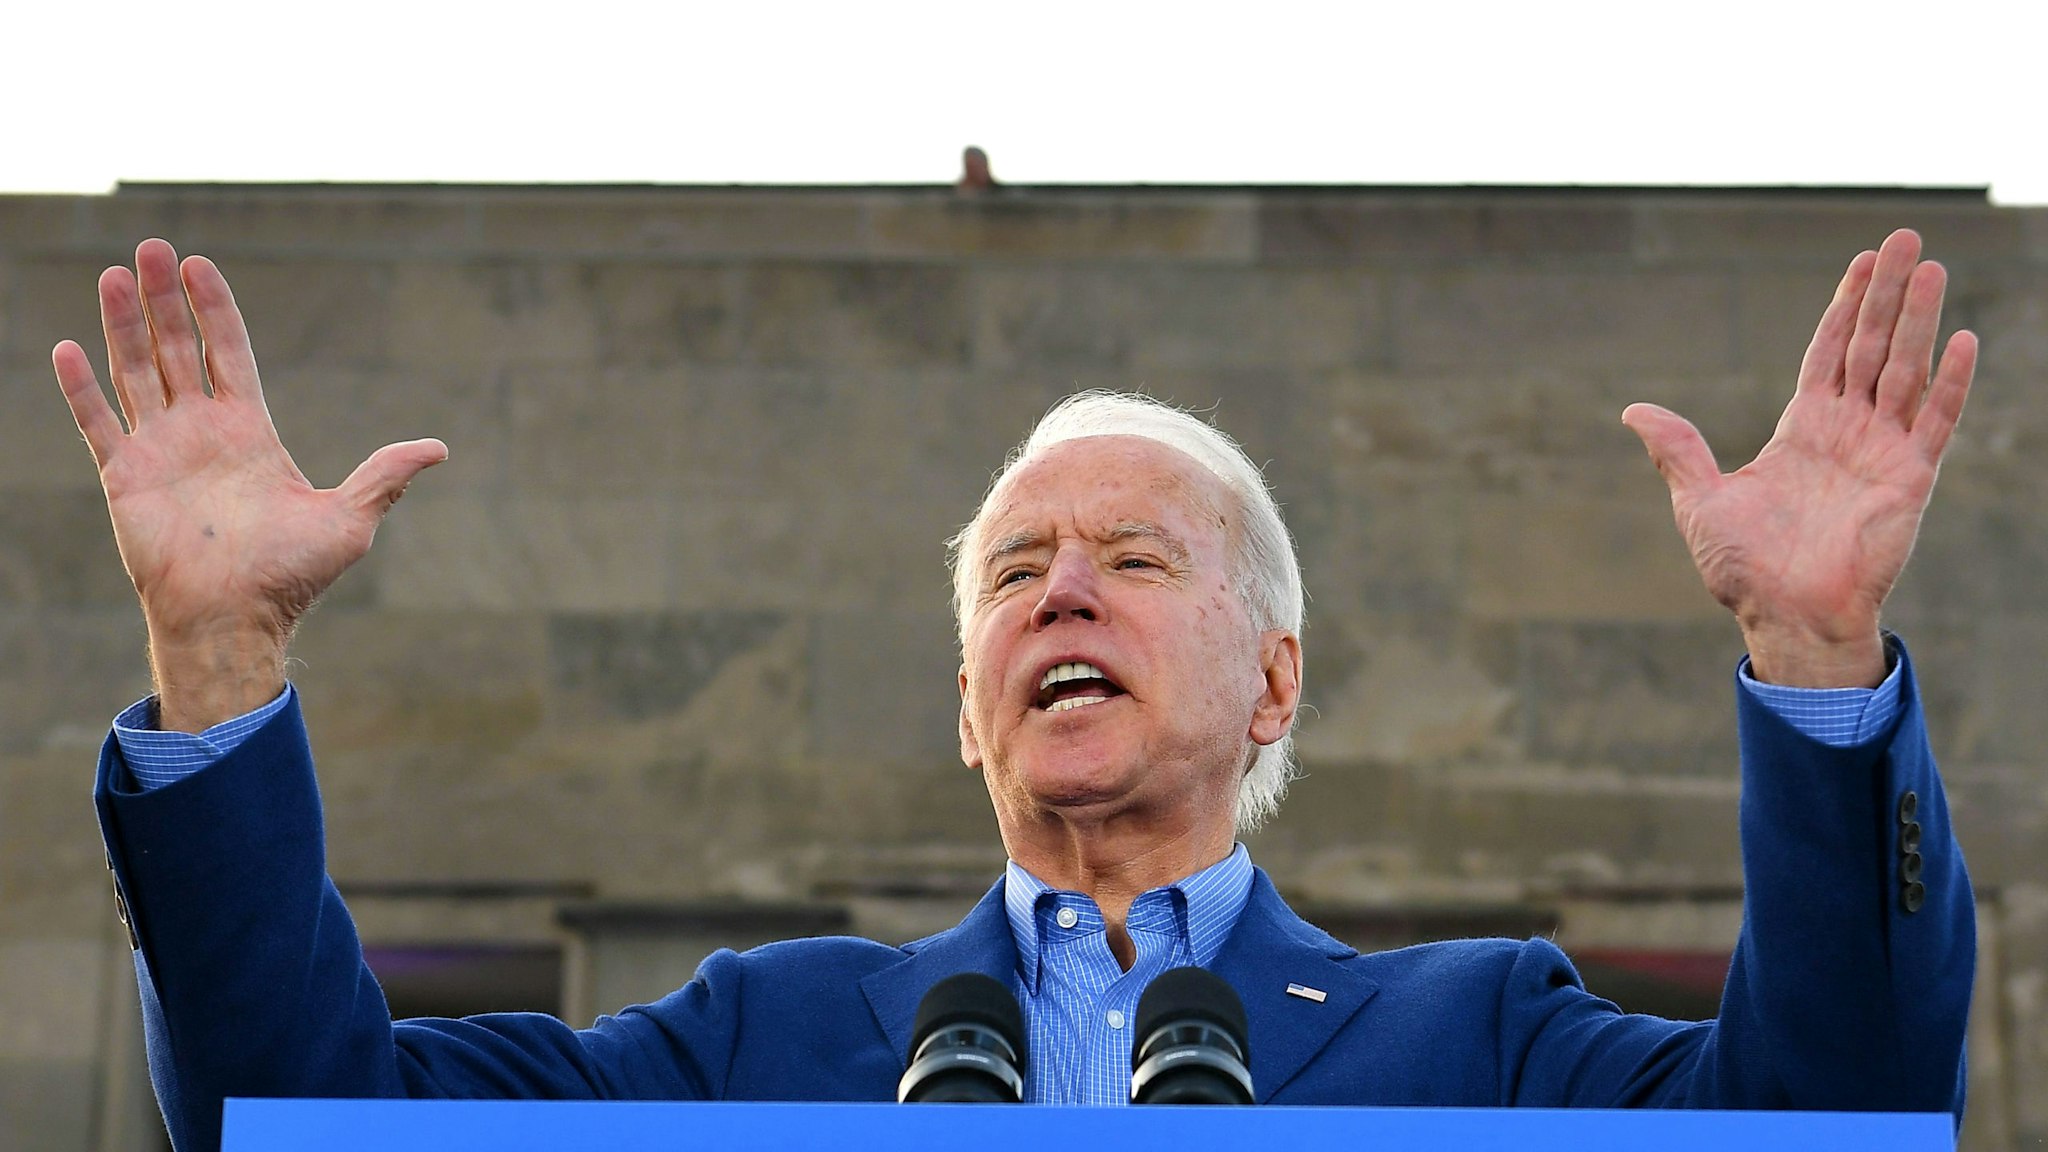 Democratic presidential candidate former Vice President Joe Biden speaks during a campaign rally at the WWI Museum and Memorial in Kansas City, Missouri on March 7, 2020.